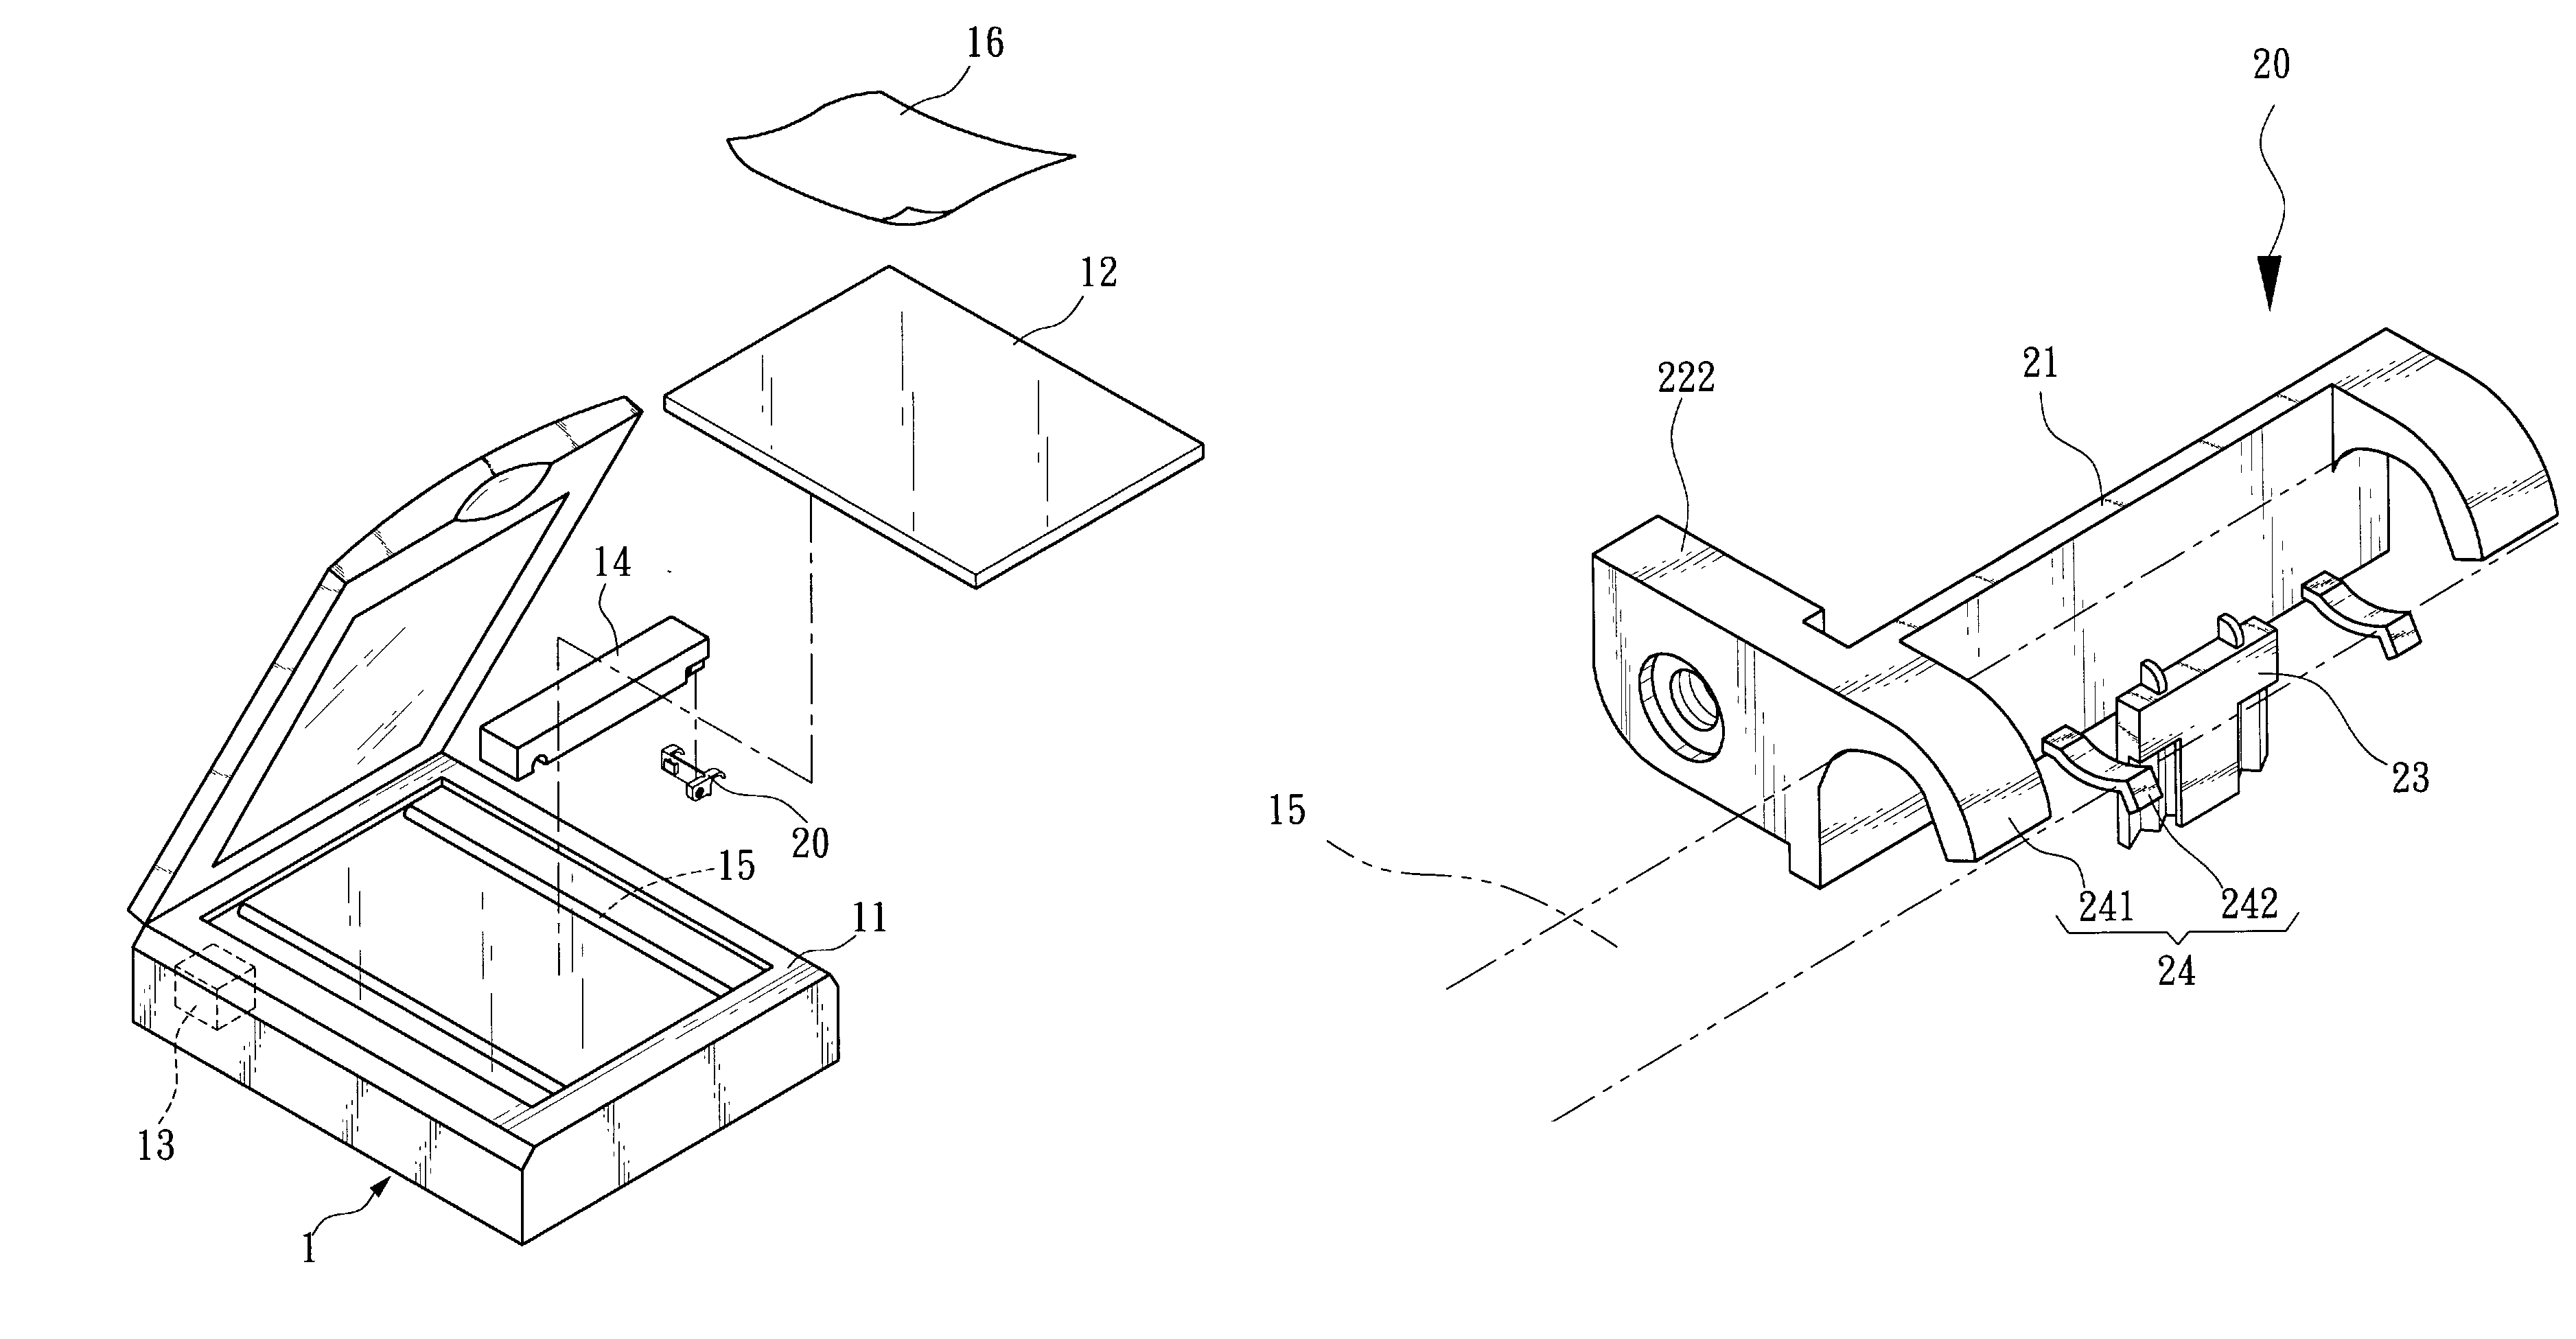 Axle sleeve apparatus for optical chassis